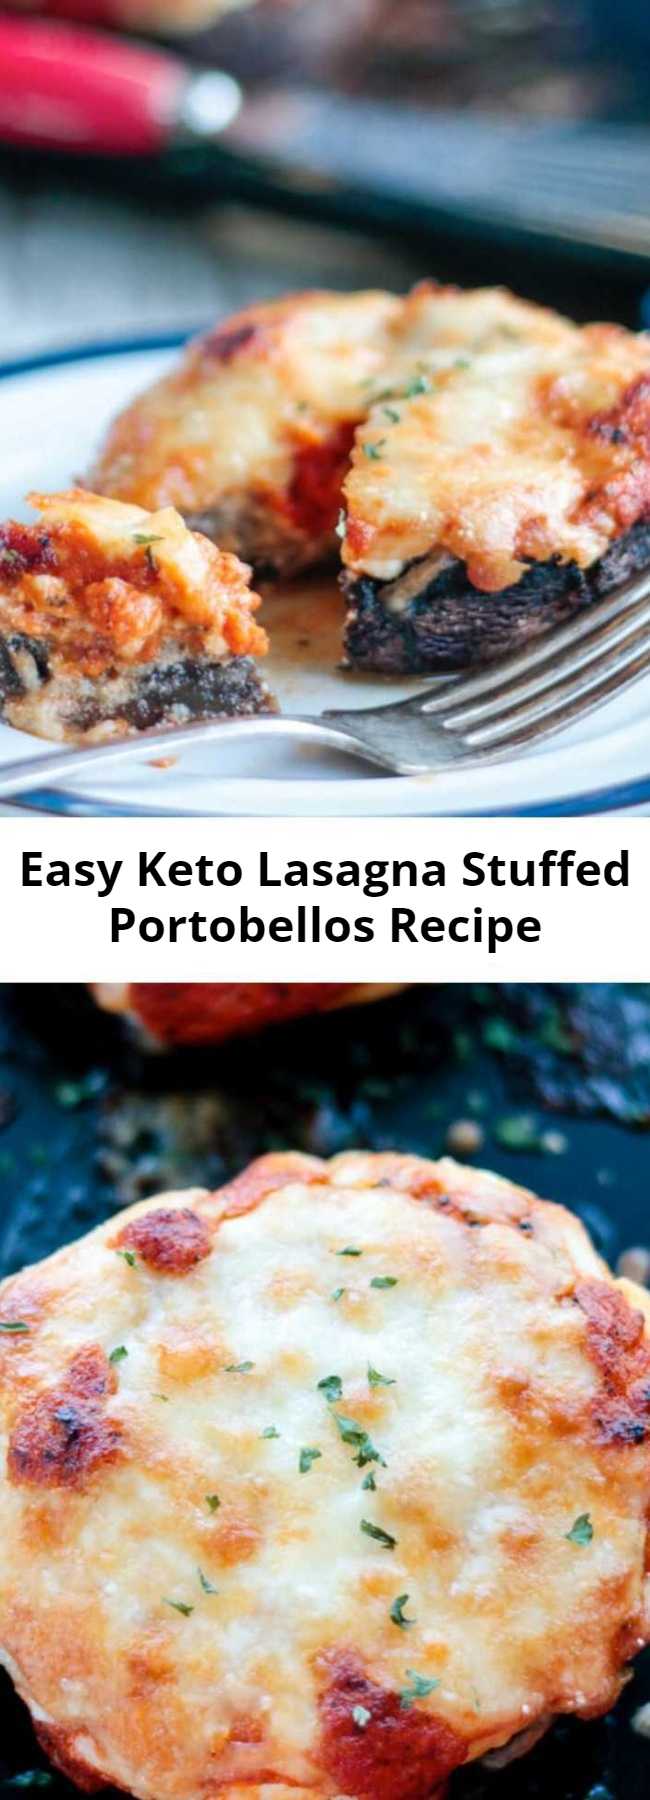 Easy Keto Lasagna Stuffed Portobellos Recipe - Easy Keto Lasagna Stuffed Portobello Mushrooms will be a new family favorite! All the flavors of your favorite classic comfort food in a low carb and fun to eat package!